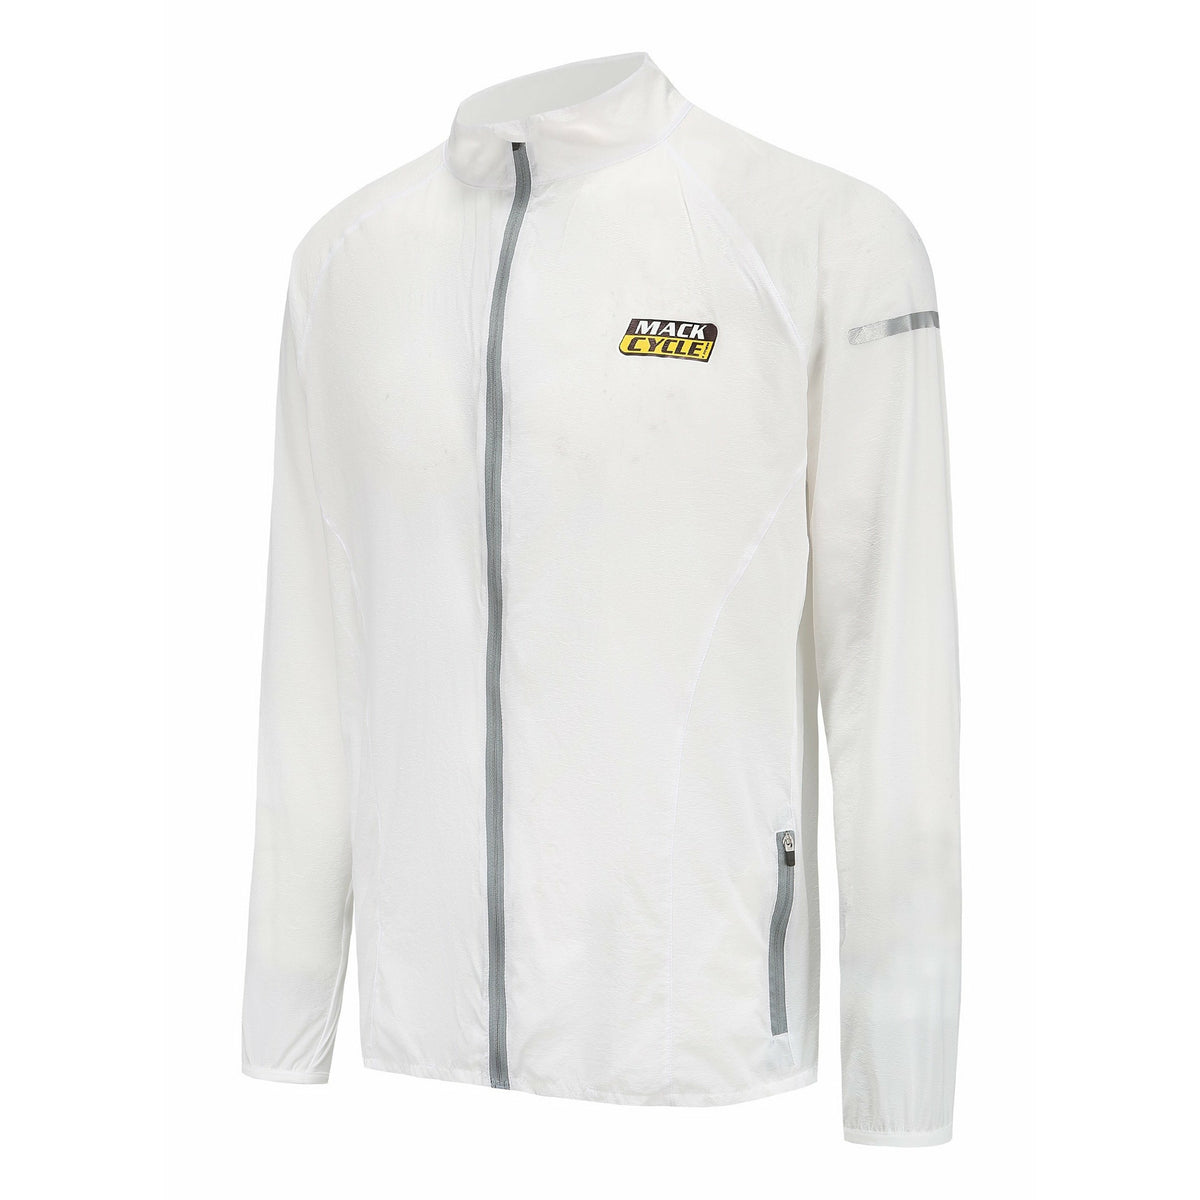 white packable cycling rain jacket with mack cycle logo